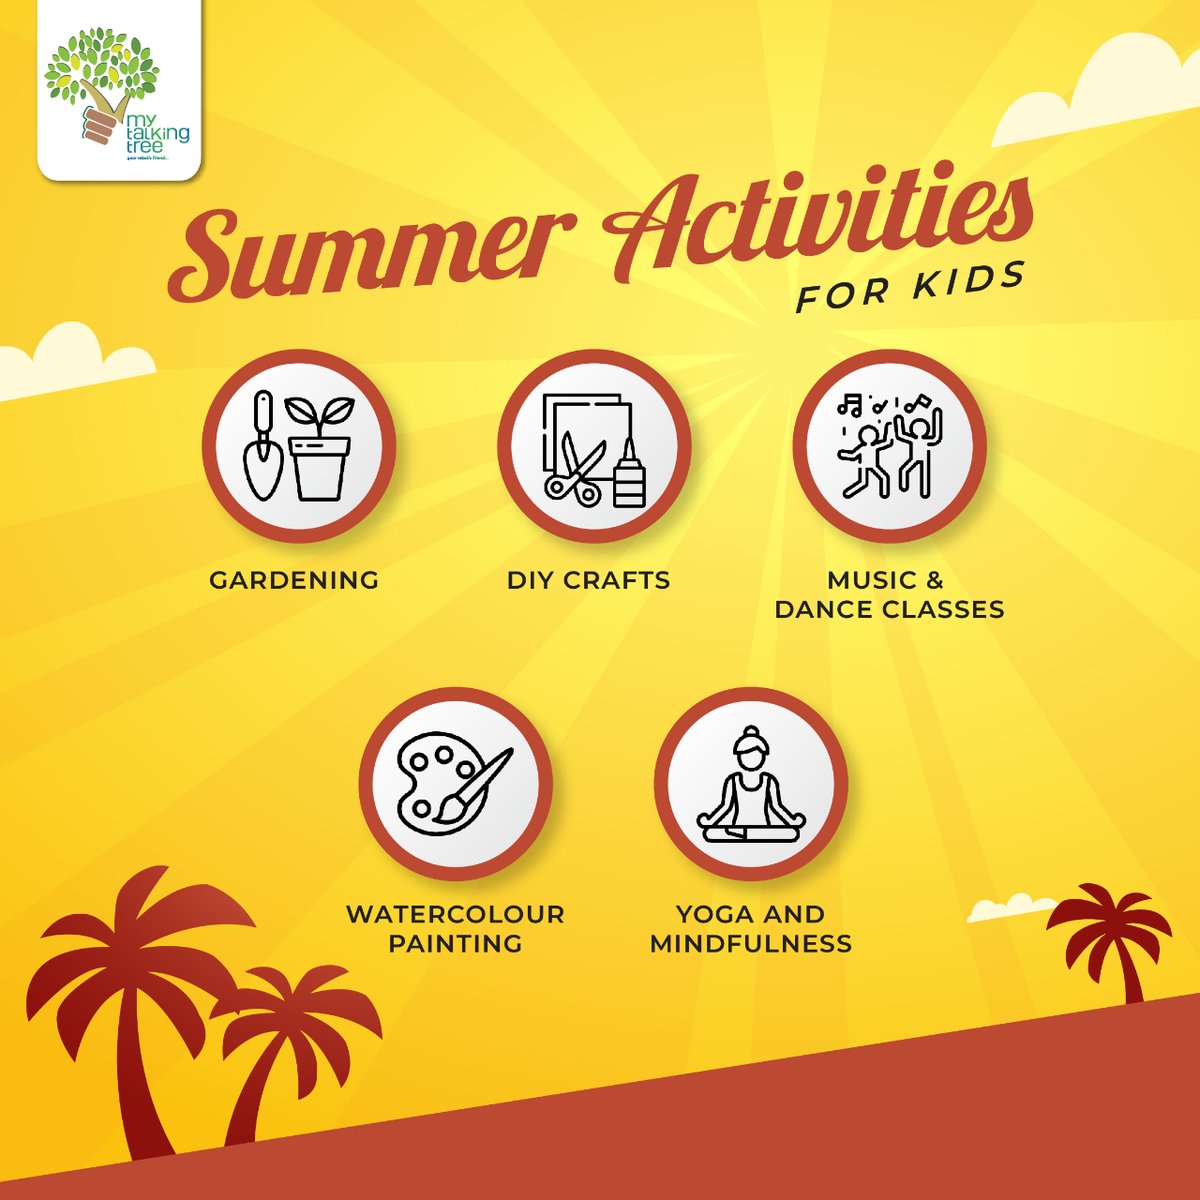 Ready for summer fun? ☀️ Keep your little ones entertained with these exciting activities that spark creativity and joy! 🌿

#Mytalkingtree #InteractiveLearning #RoboticTeacher #TechnologyinEducation #teachingtree #mrdudu #robotic #RoboEducator #hyperactivekids